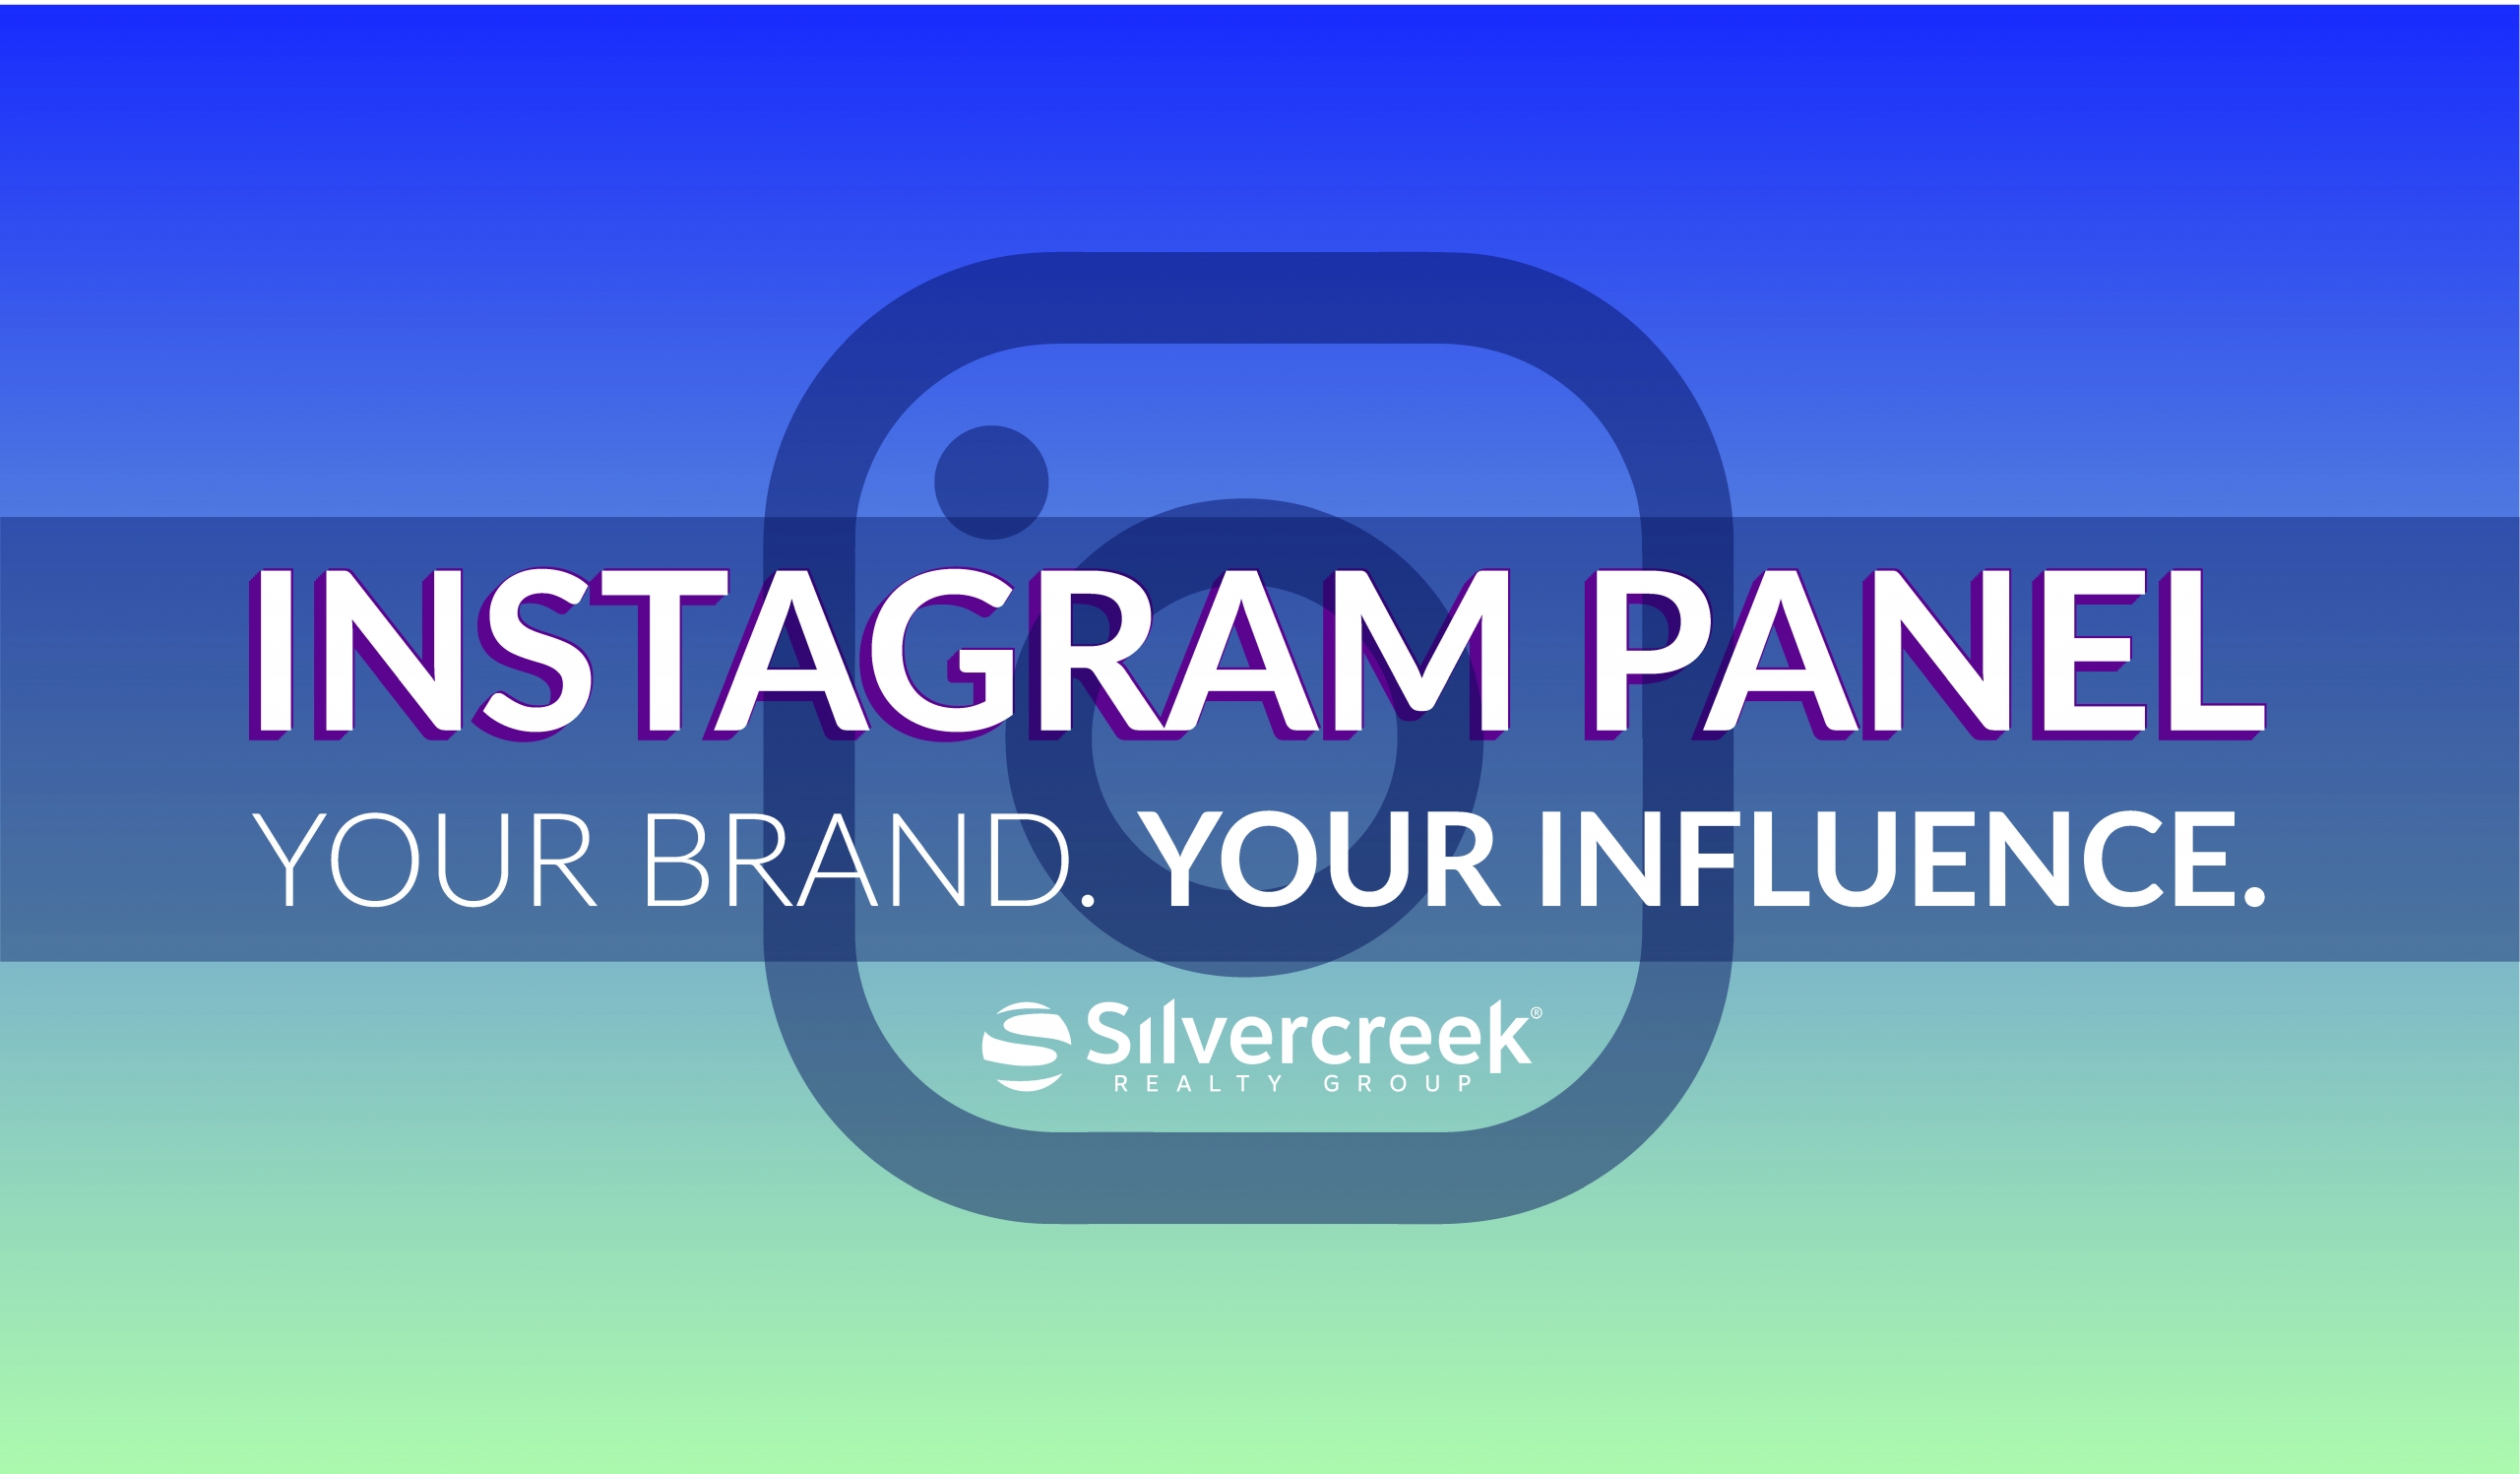 Instagram 2020 - Your Brand, Your Influence